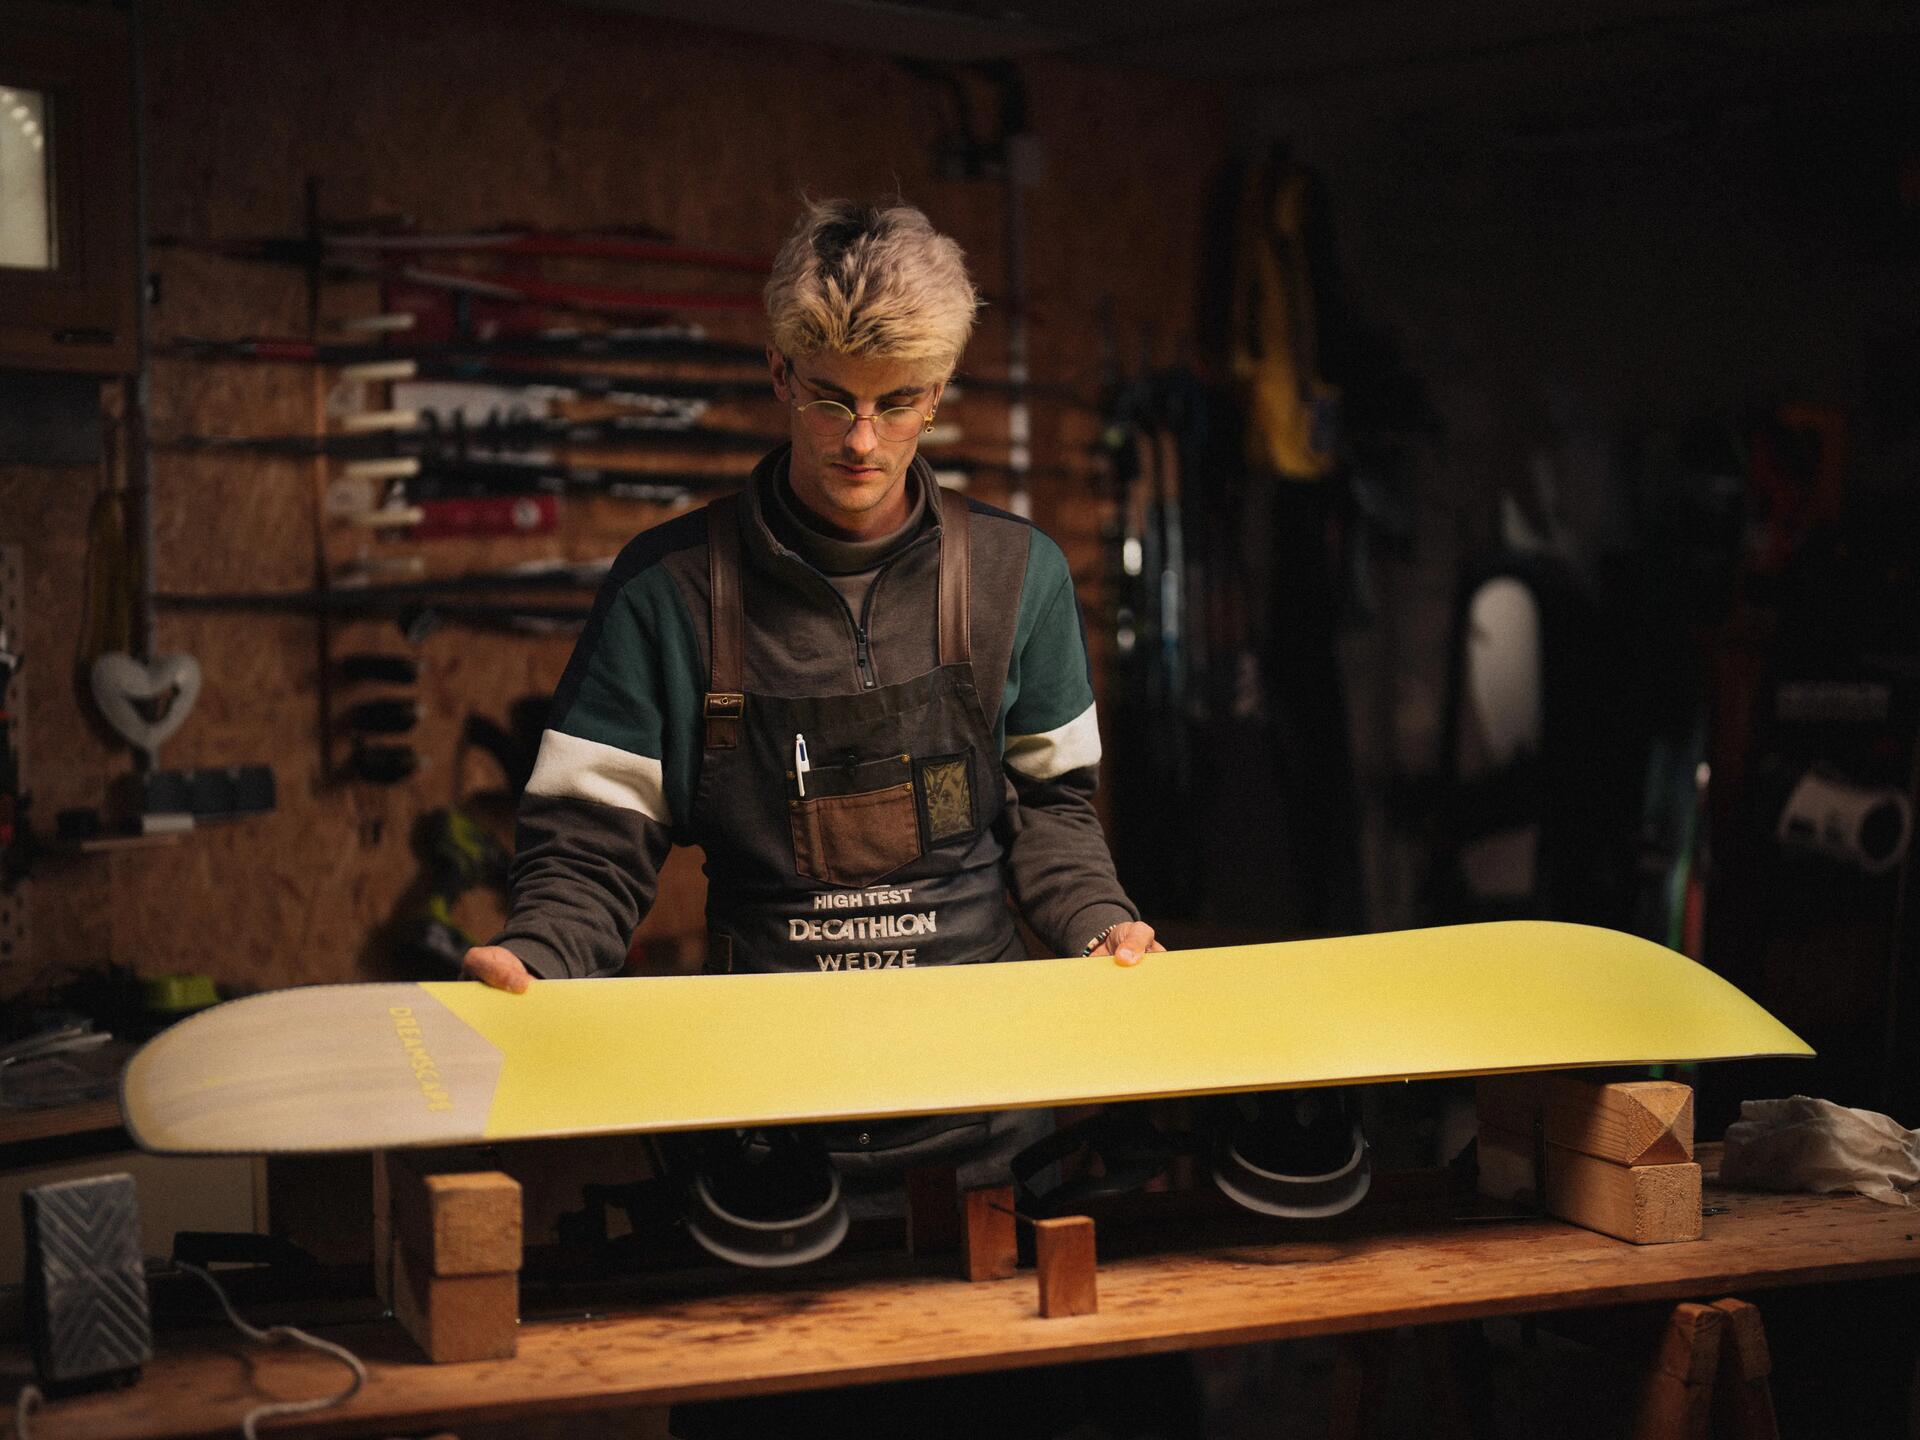 Our sharpening guide for your snowboard